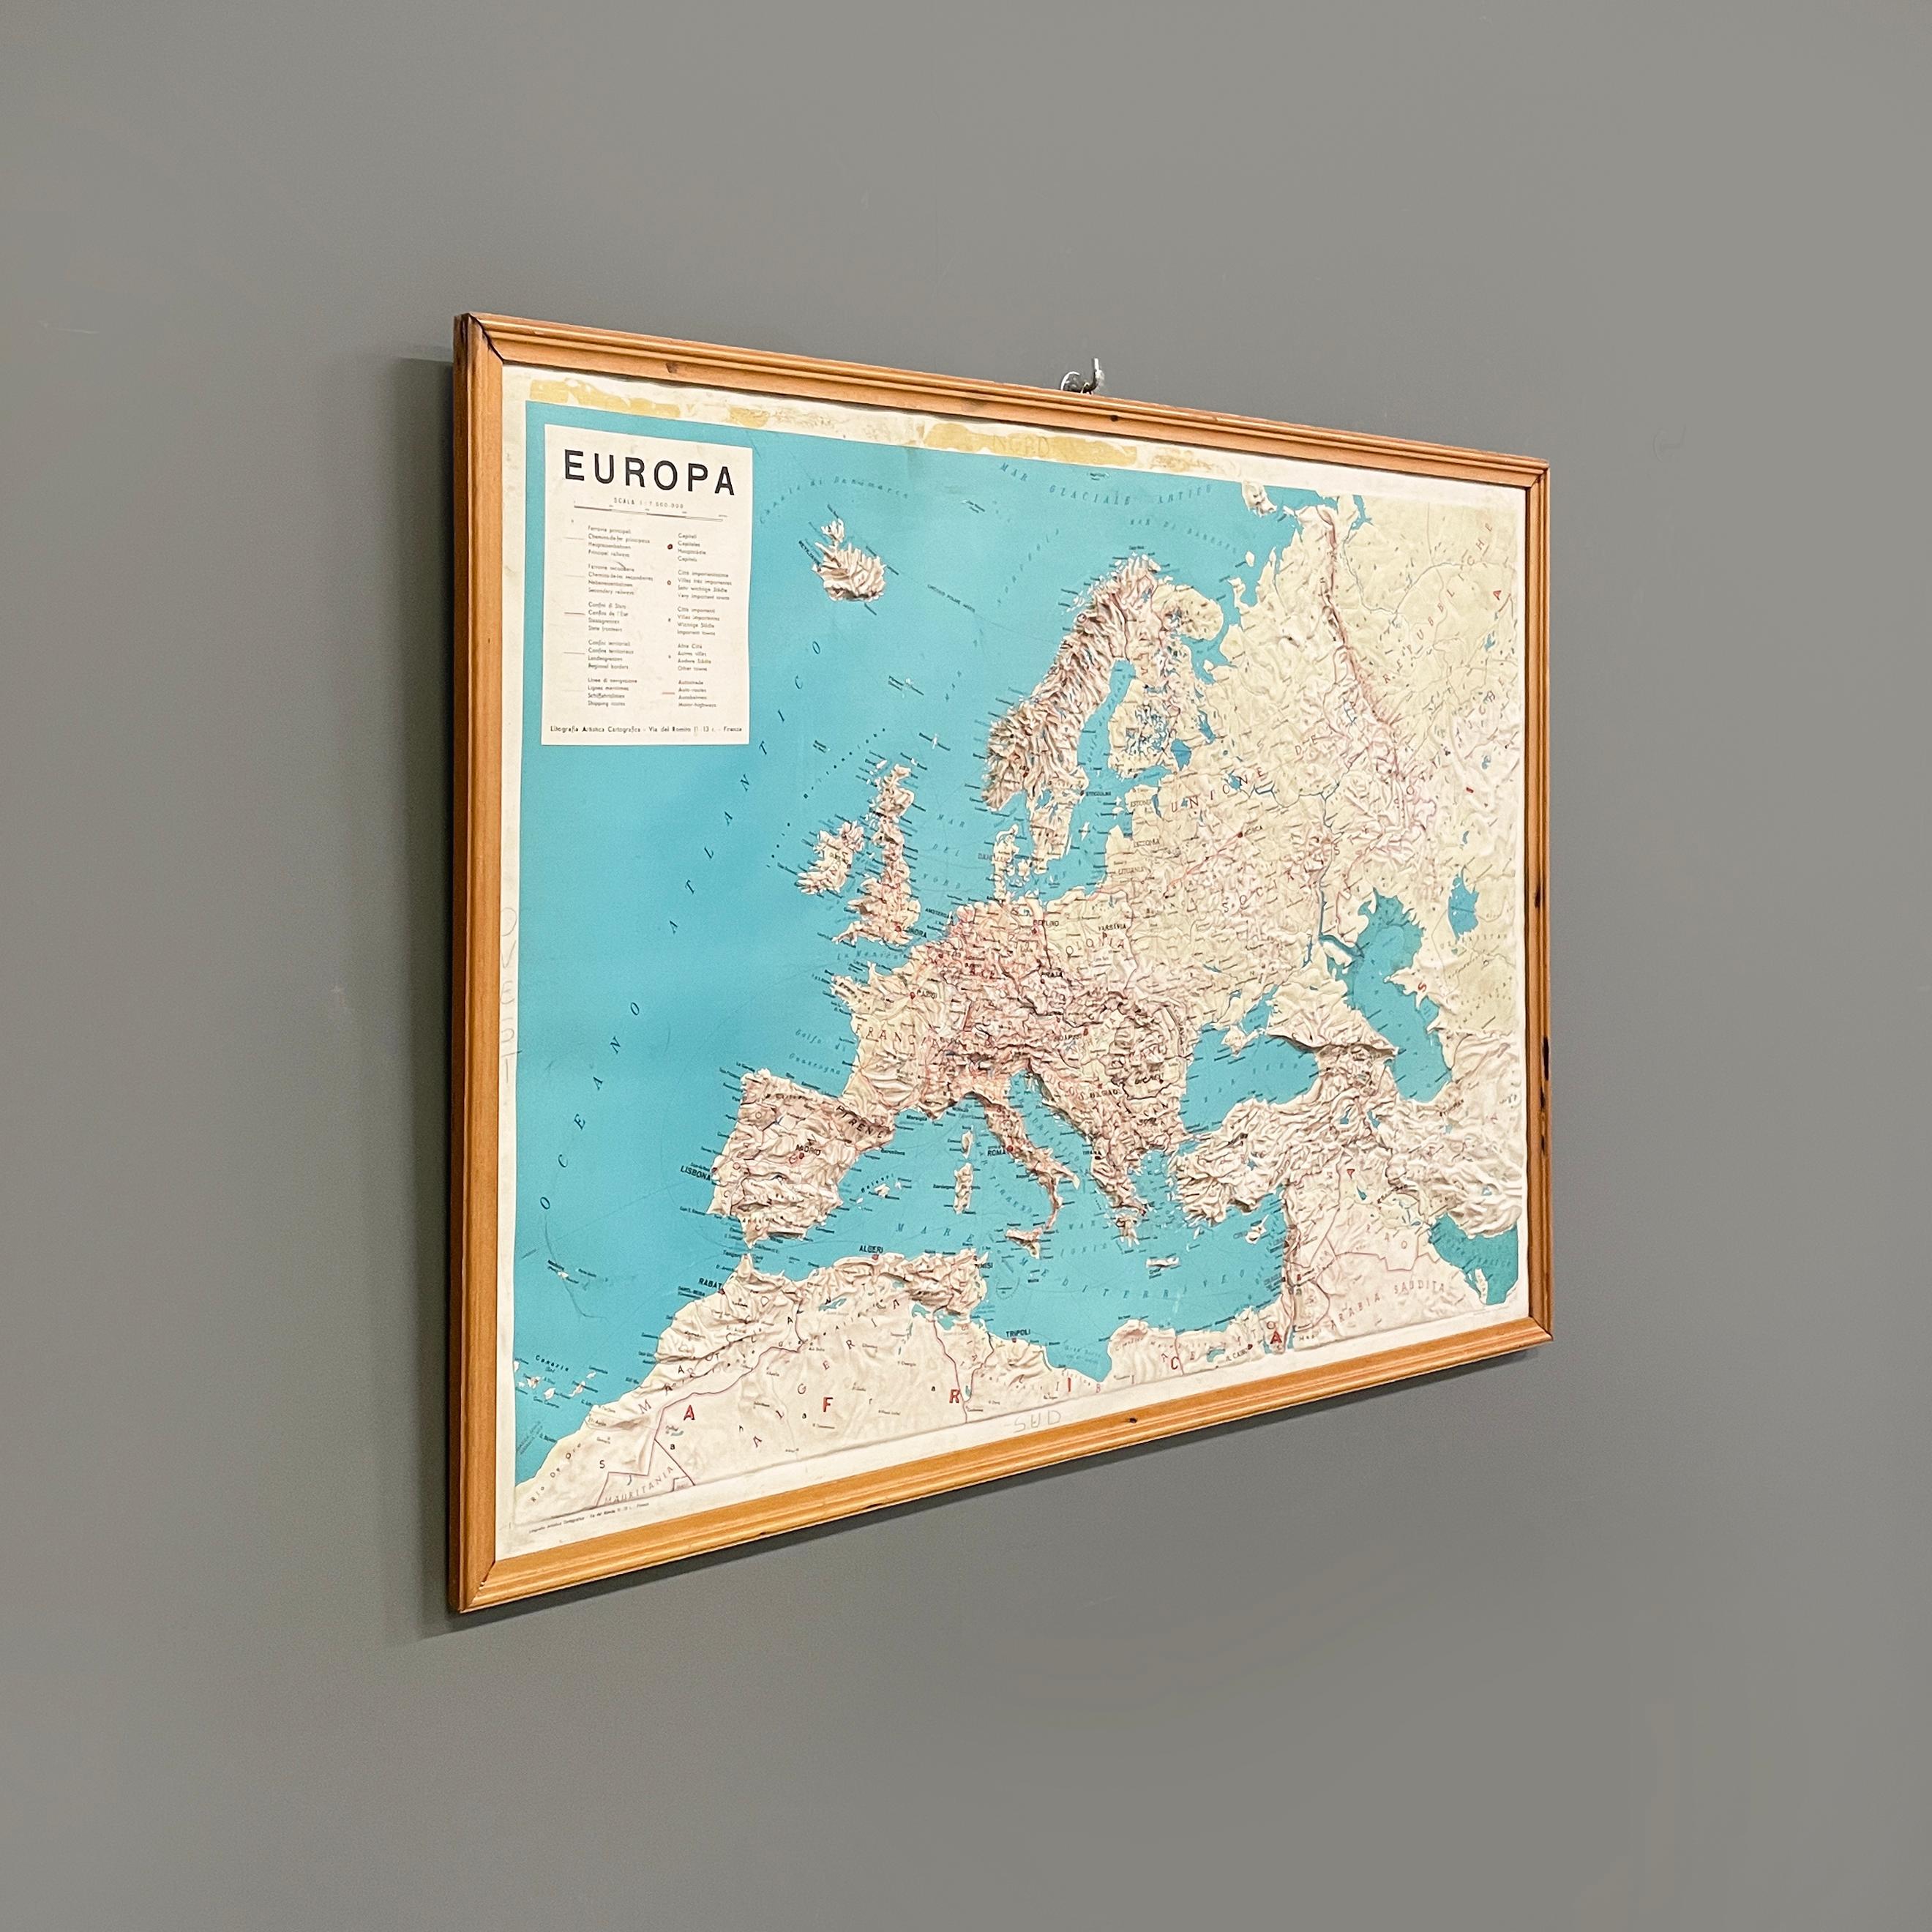 Italian modern Topographic geographical map in wood frame of Europe, 1950s-1990s
Three-dimensional geographical map of Europe on paper. The topographic map presents the states with their respective mountain ranges in relief. The colors range from